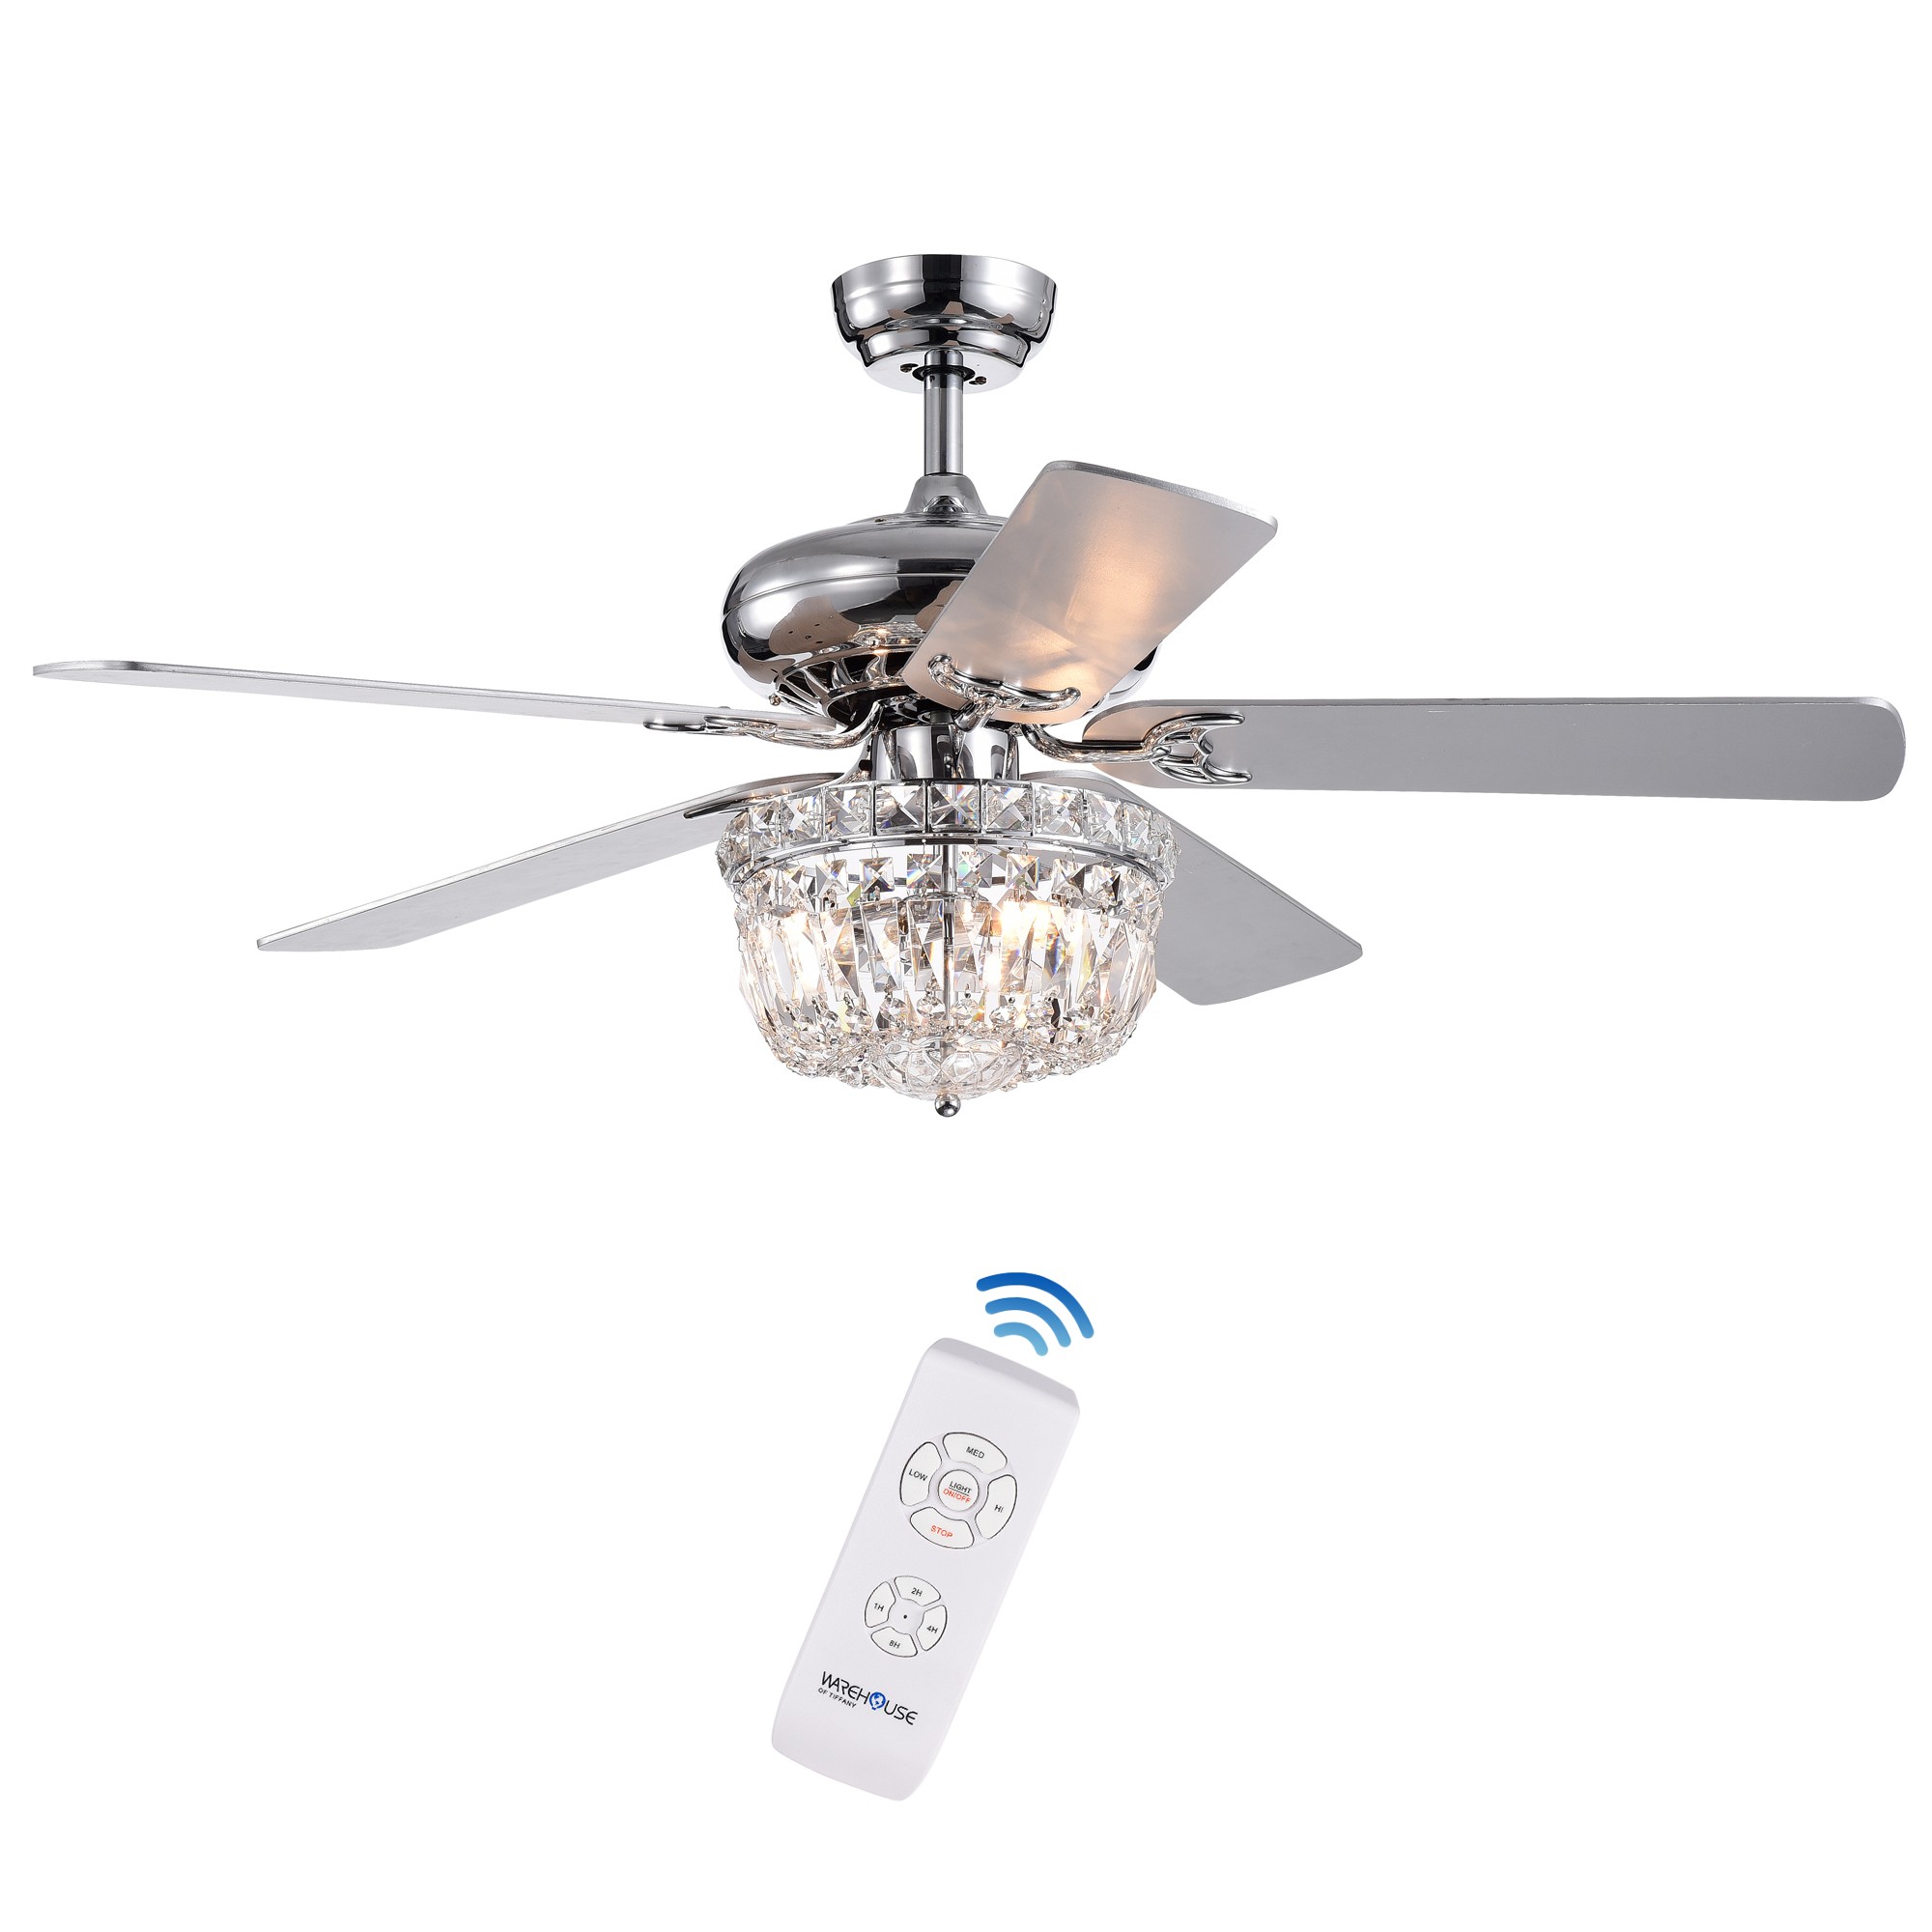 Galileo 52-Inch 5-Blade Chrome Lighted Ceiling Fans with Crystal Bowl Shade Optional Remote (2 Color Blades)